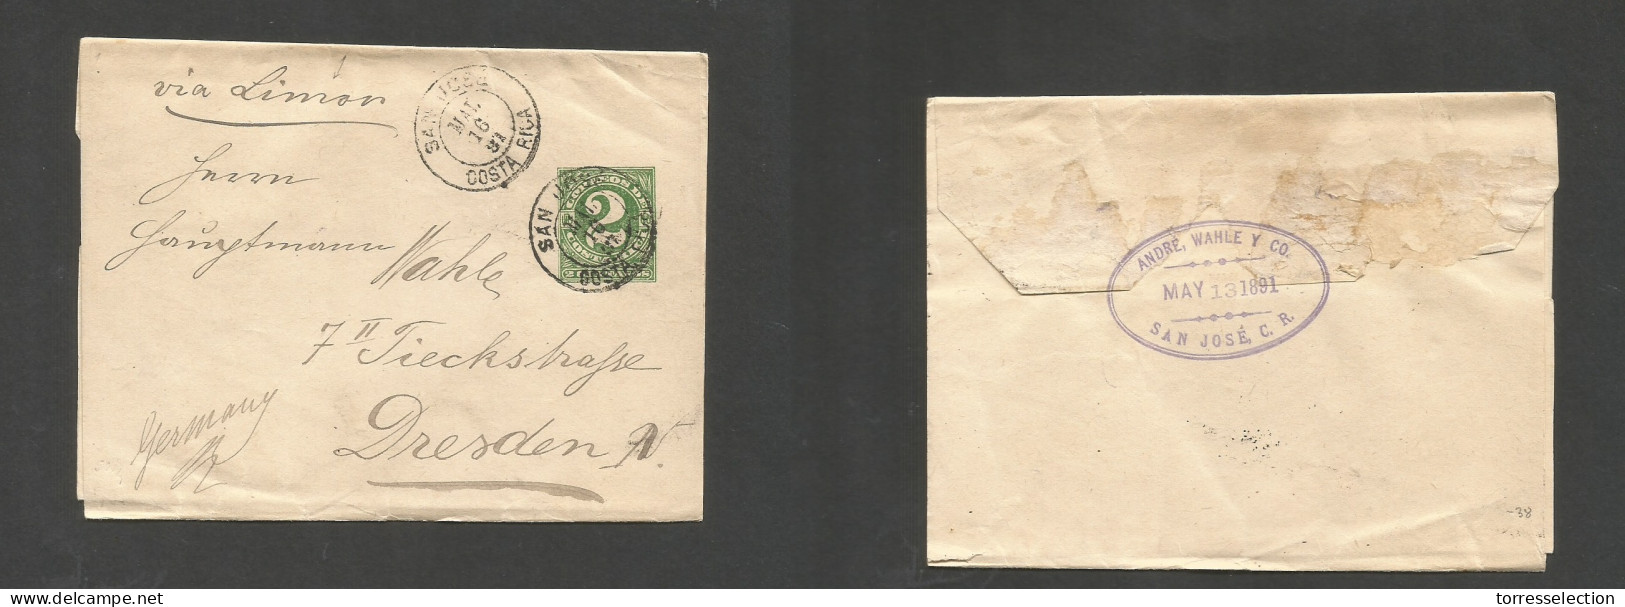 COSTA RICA. 1891 (16 March) San Jose - Germany, Dresden Via Limon 2c Green Complete Stat Wrapper, Cds. VF Used. SALE. - Costa Rica